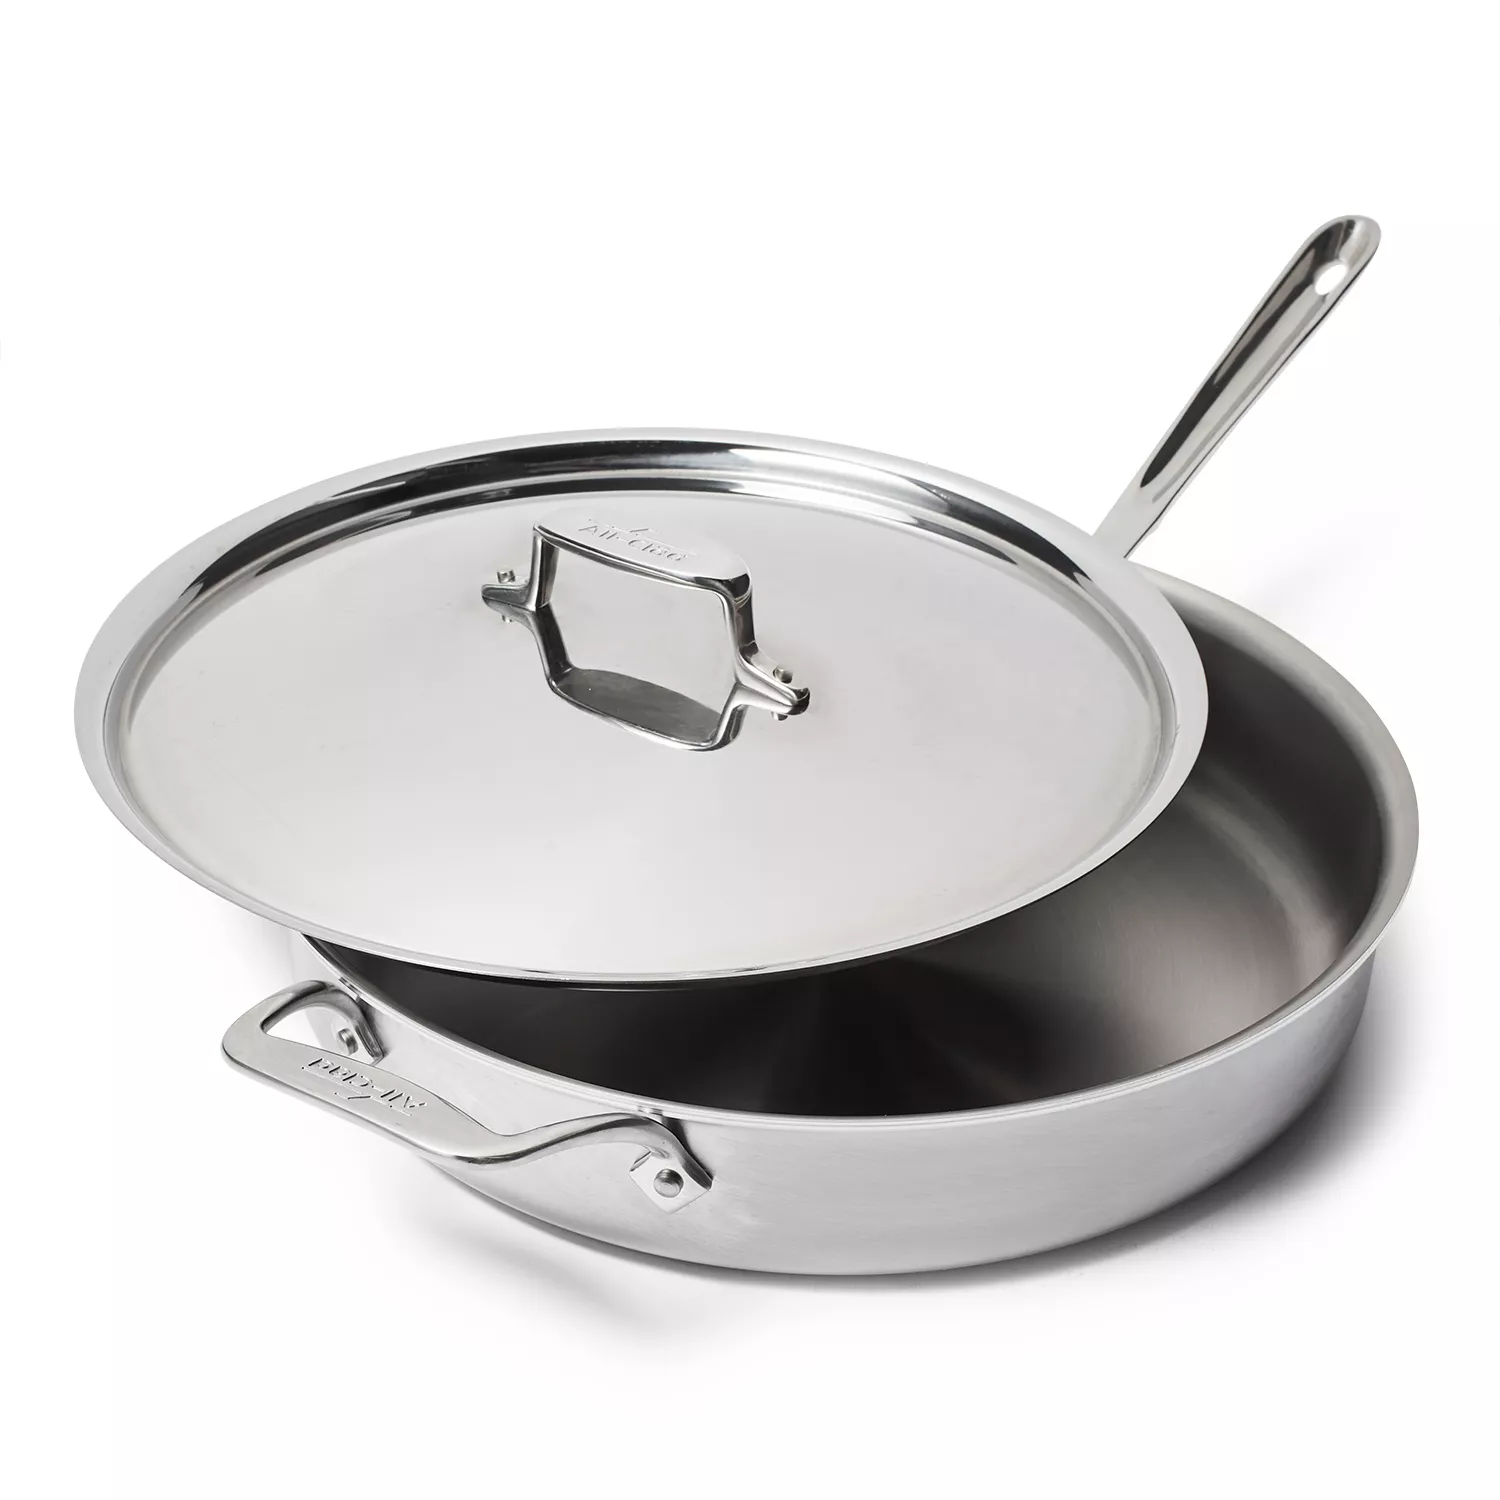 All-Clad D5 Brushed Stainless Steel Sauté Pan